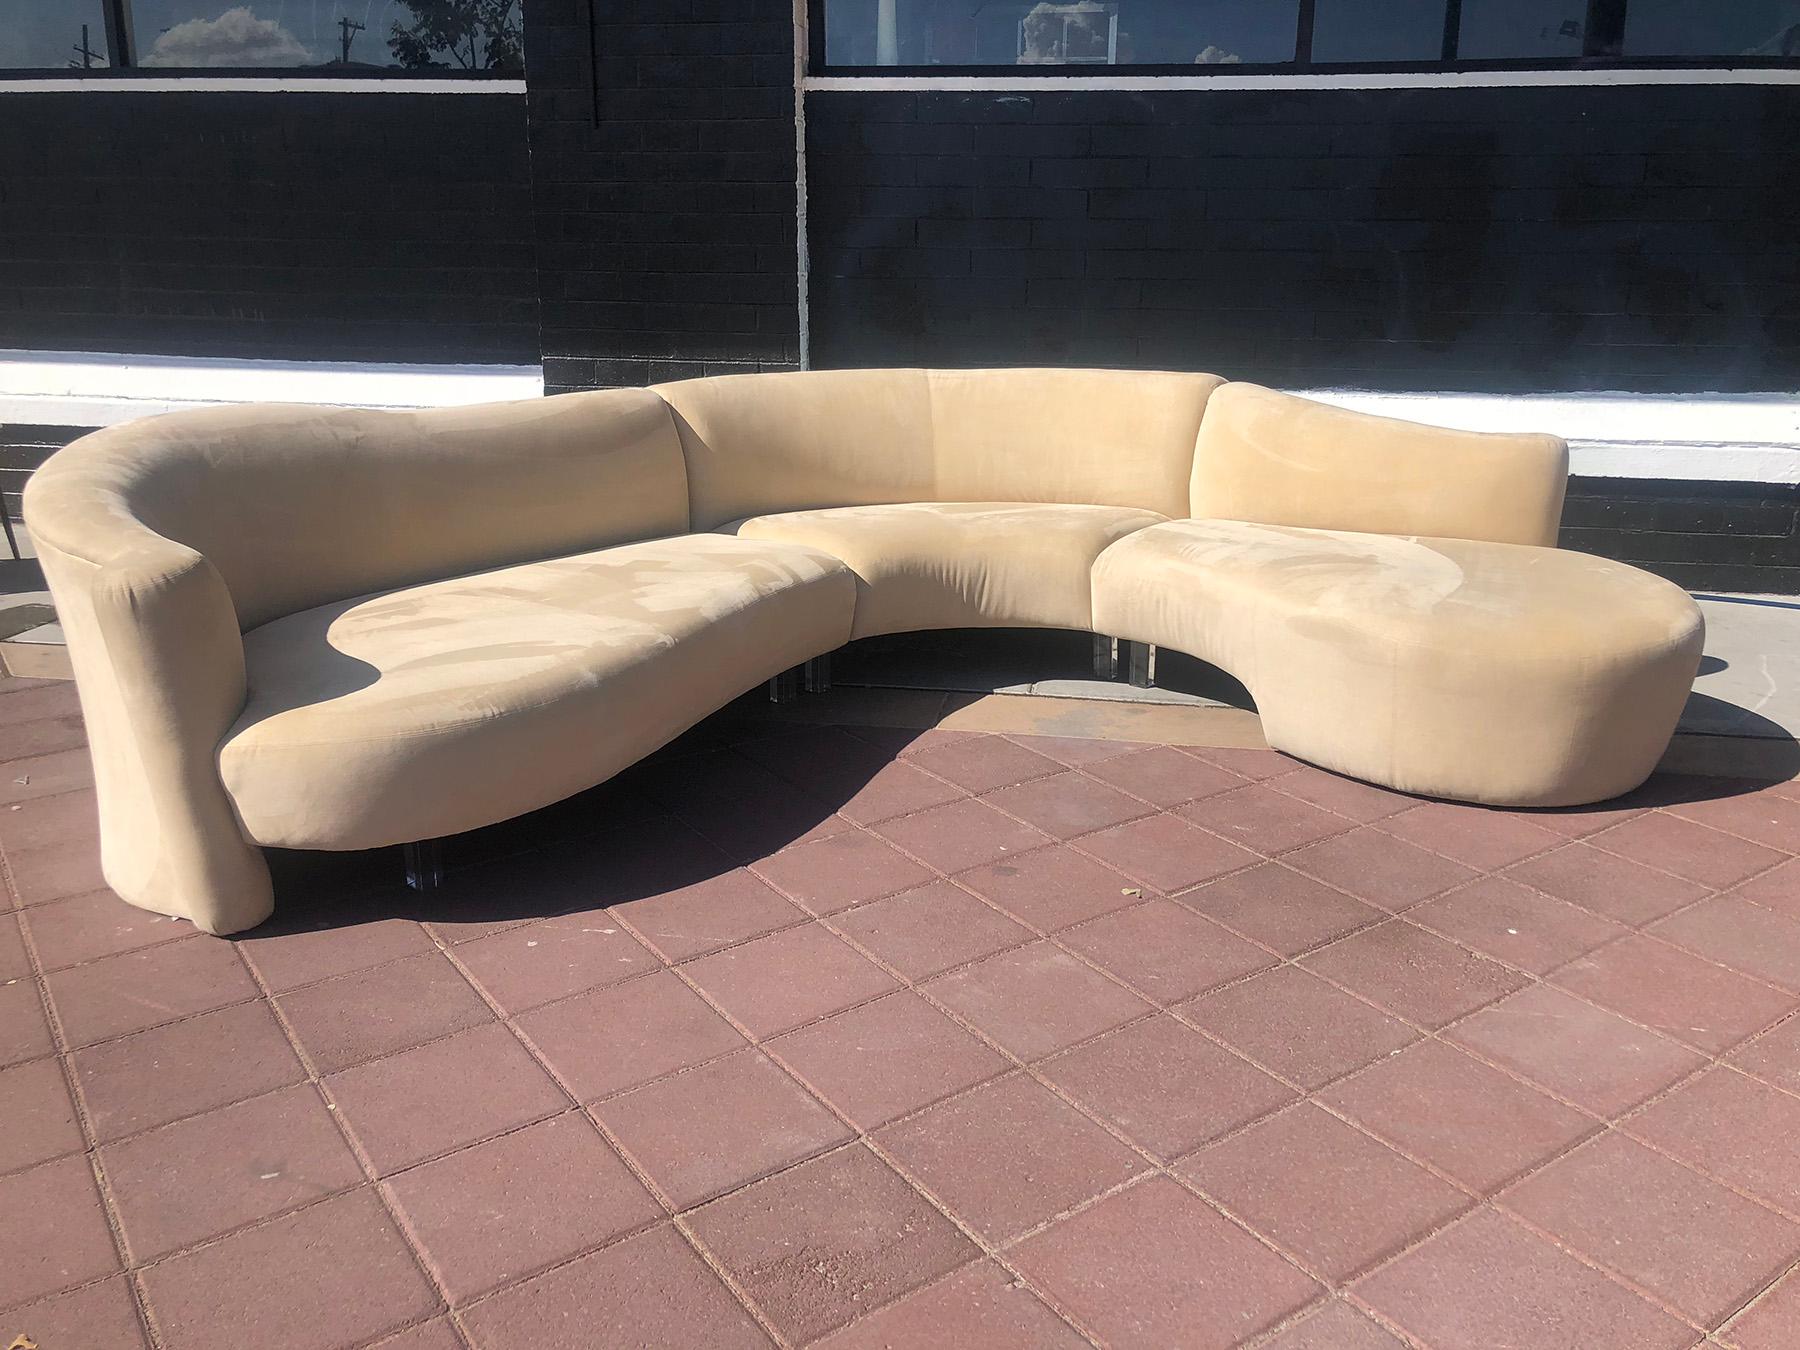 Late 20th Century Vladimir Kagan Sectional Sofa for Weiman Preview